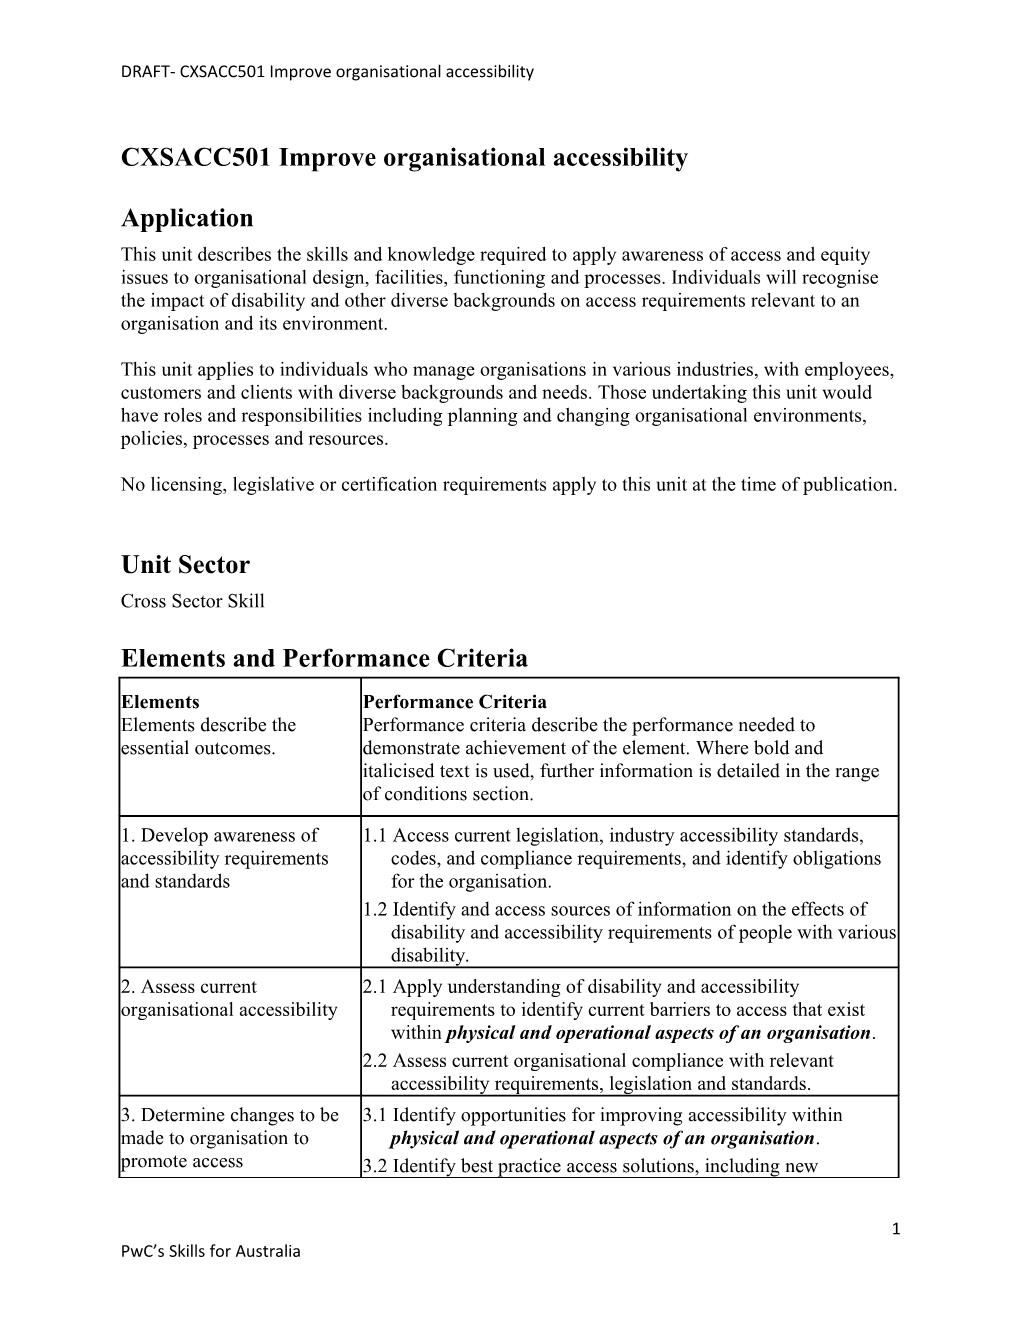 DRAFT- CXSACC501 Improve Organisational Accessibility